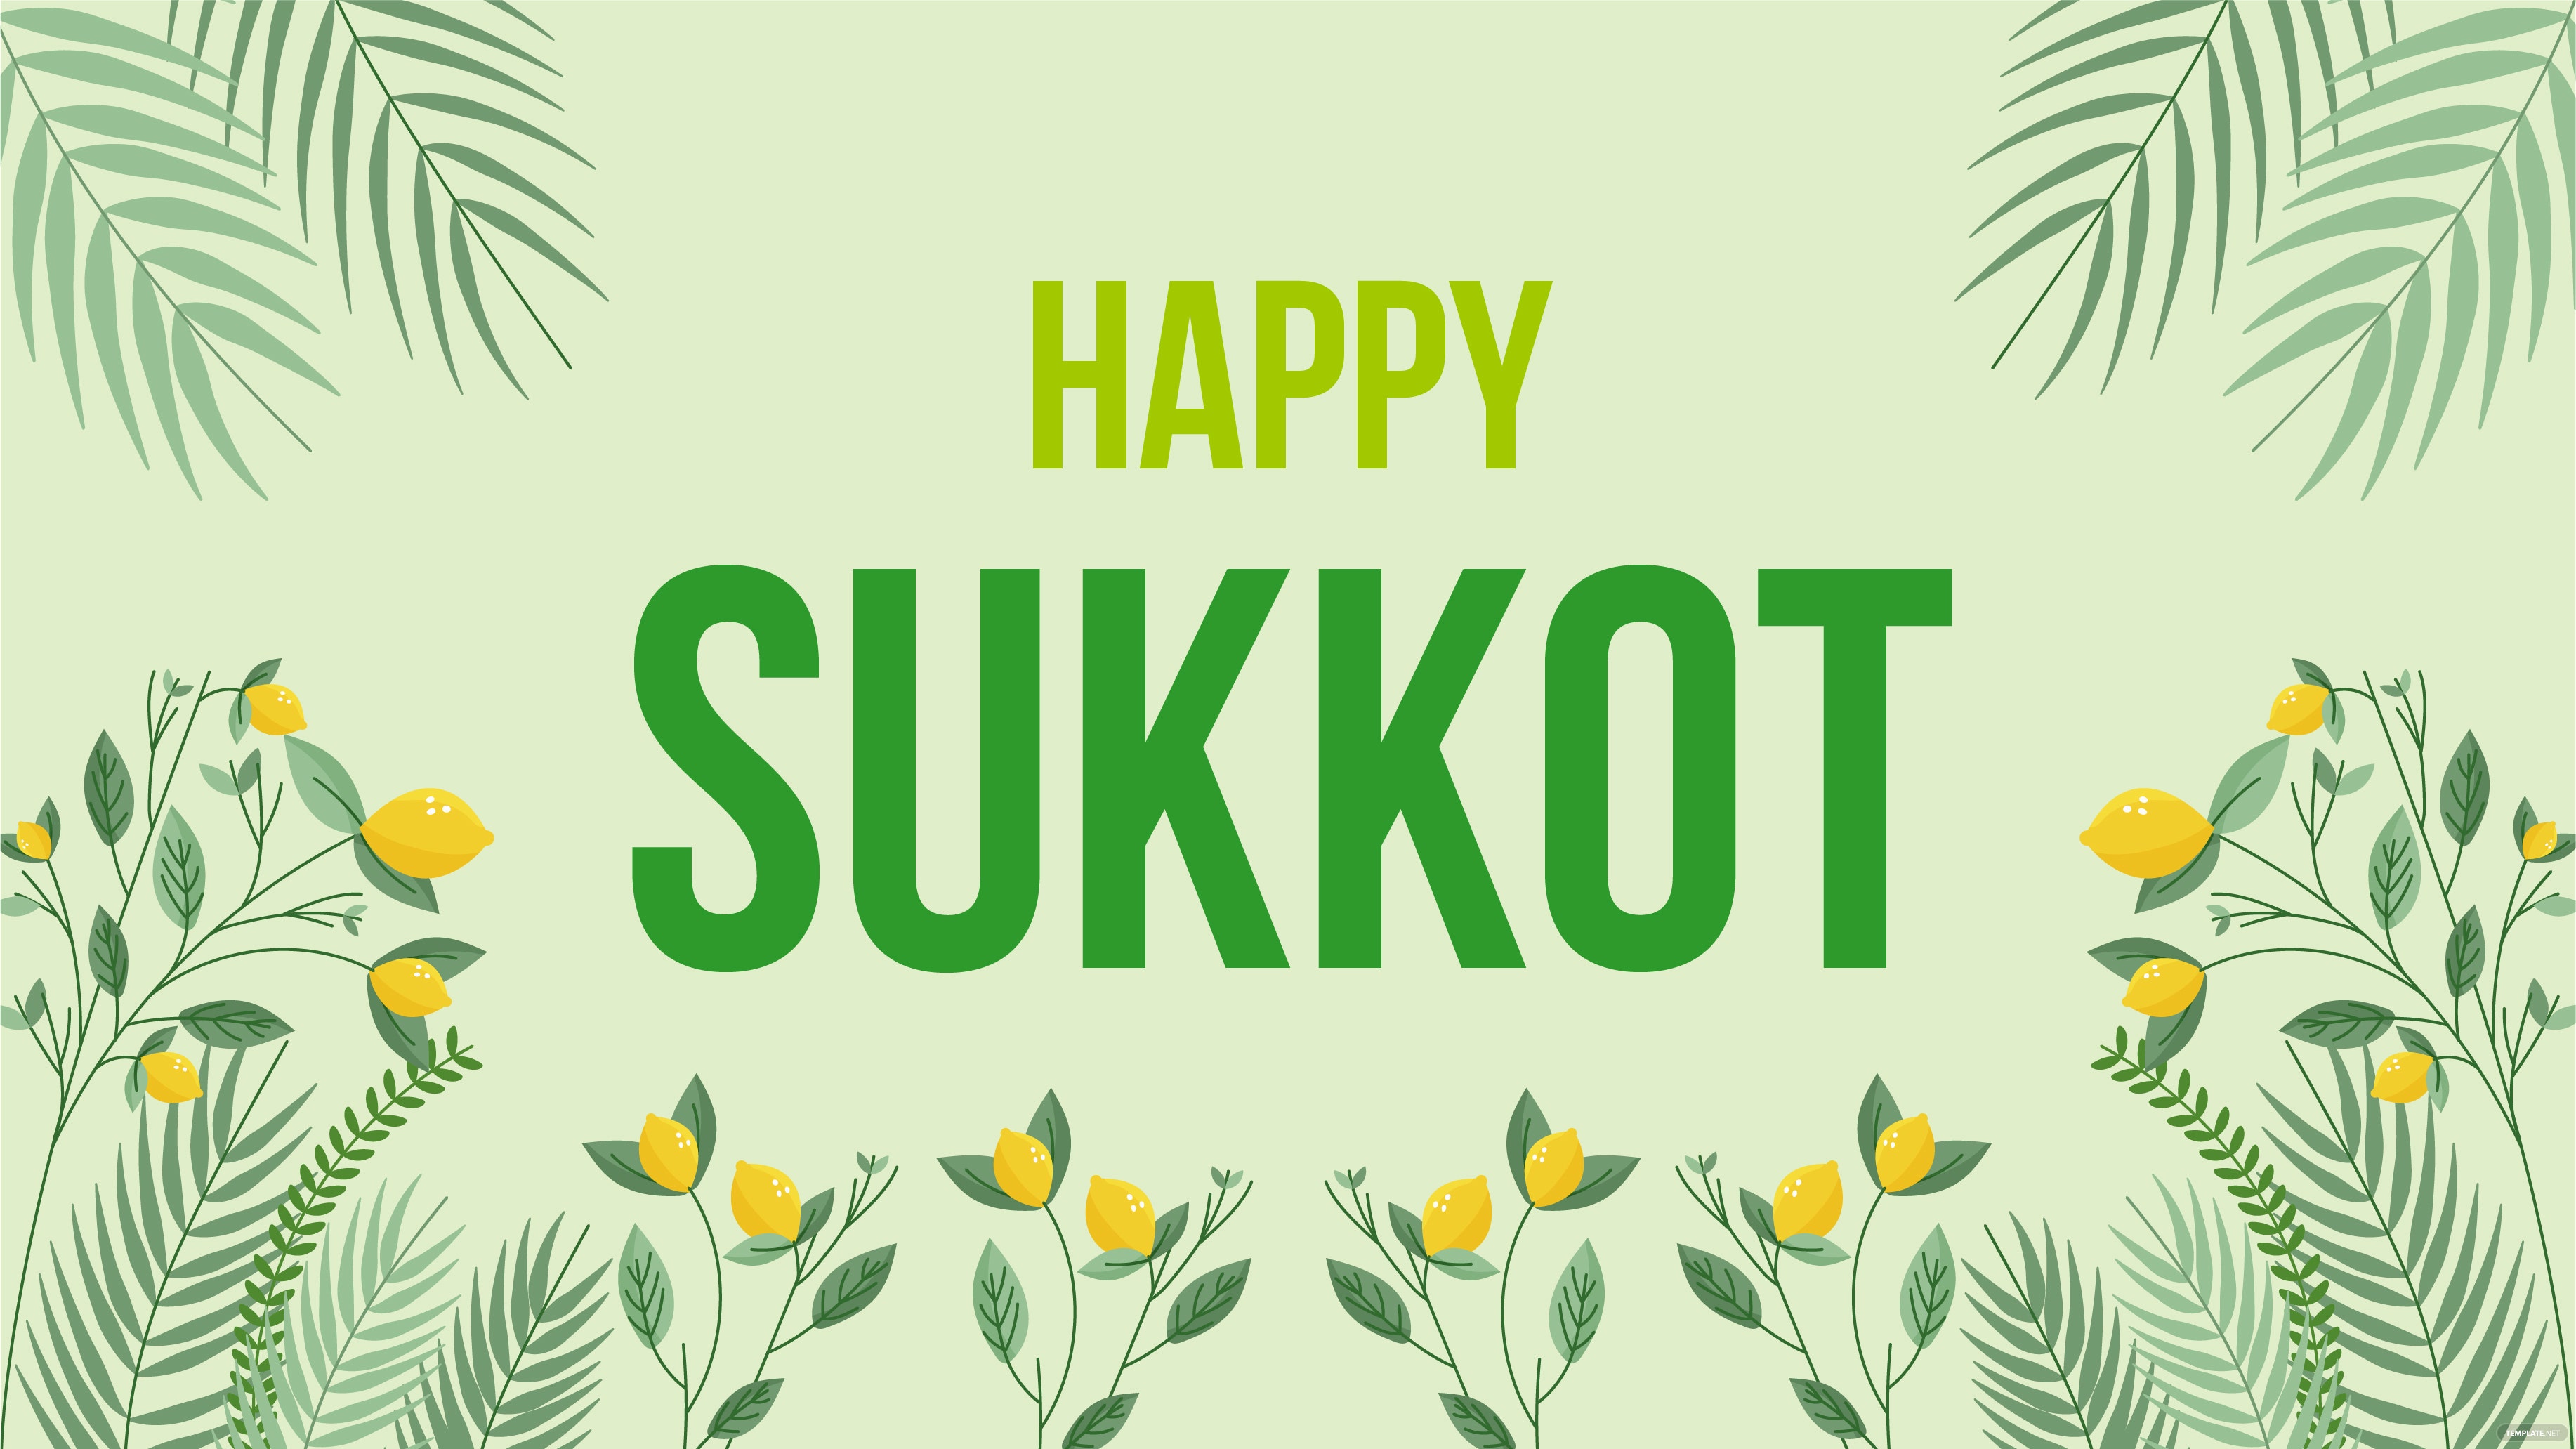 sukkot wallpaper background ideas and examples